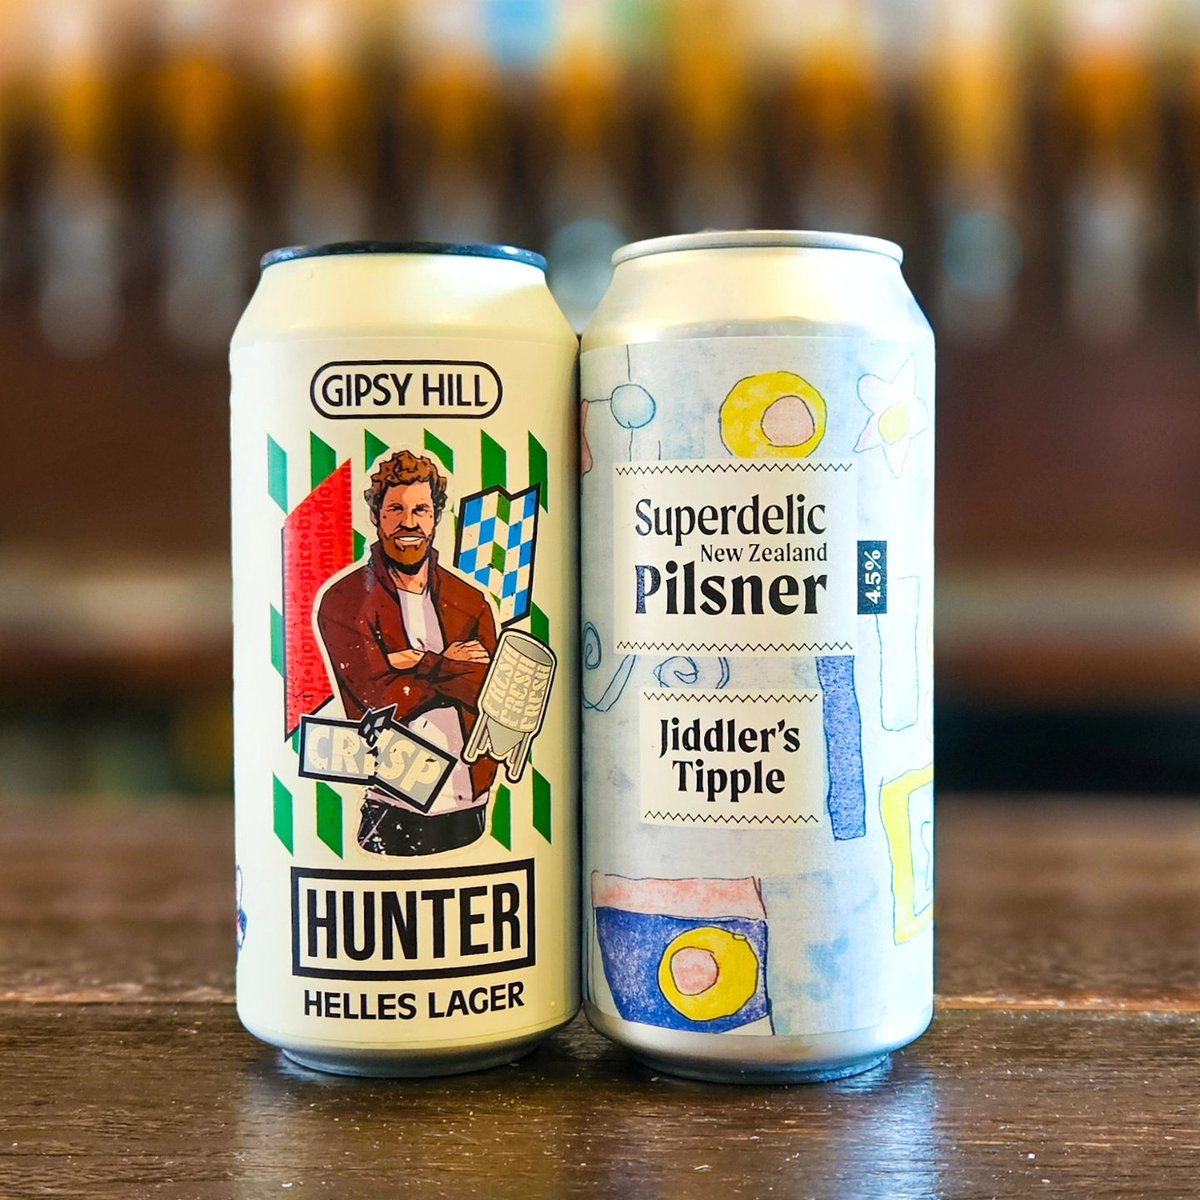 Lager, Lager, Lager! Crisp, Cold and perfect in this hot weather. We've got 2 on Tap and 14 in the fridge for you to enjoy. Come drink the good stuff!